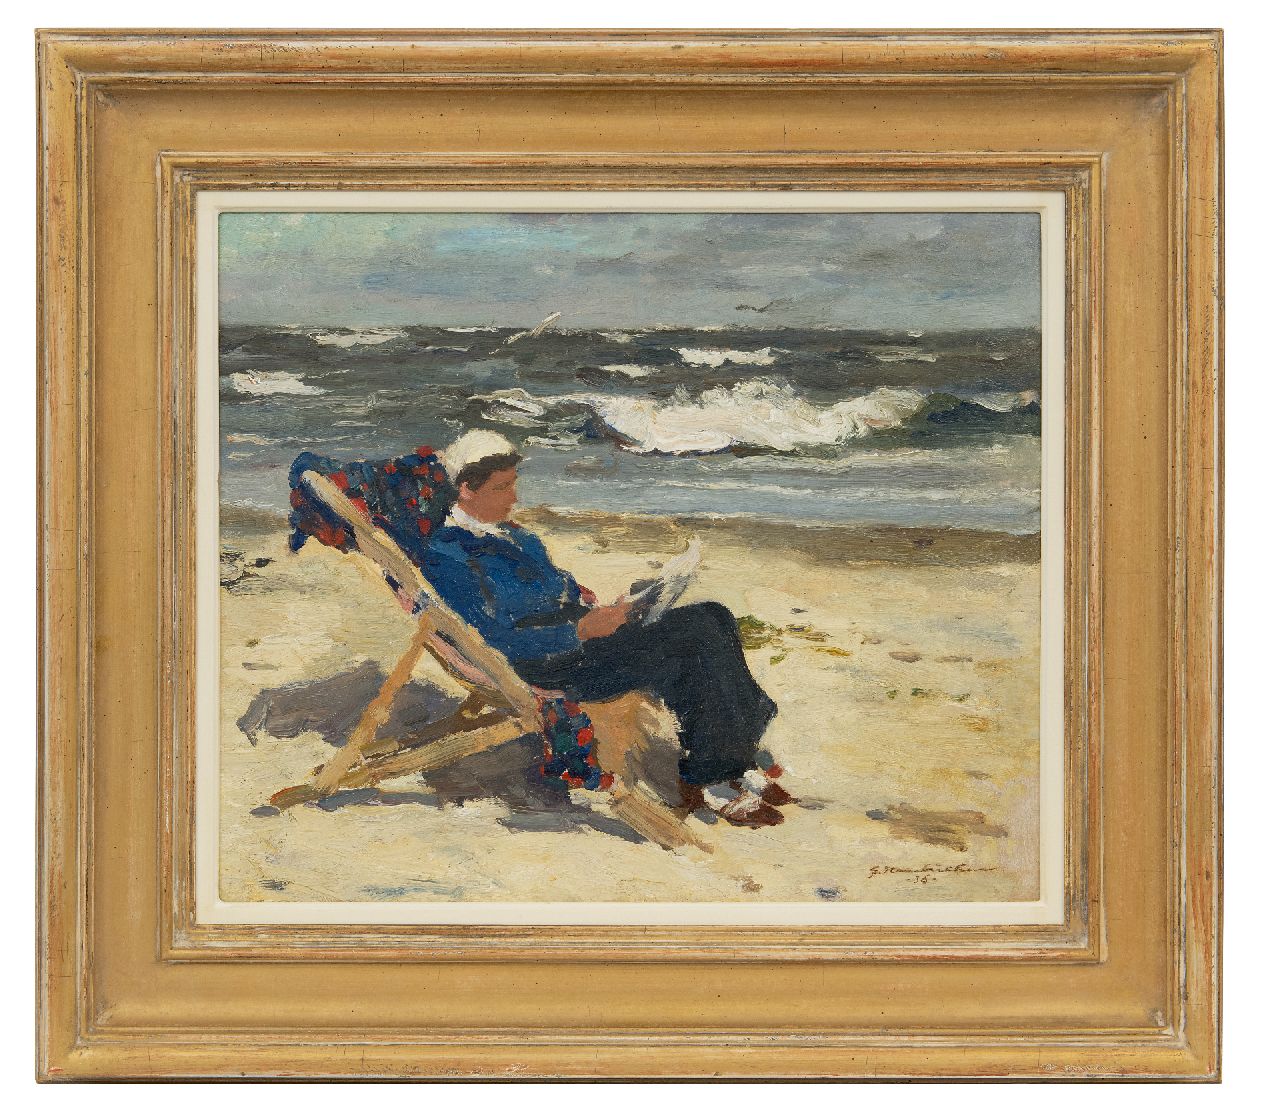 Hambüchen G.  | Georg Hambüchen | Paintings offered for sale | Lady reading in a beach chair, oil on board 38.4 x 46.0 cm, signed l.r. and dated '36